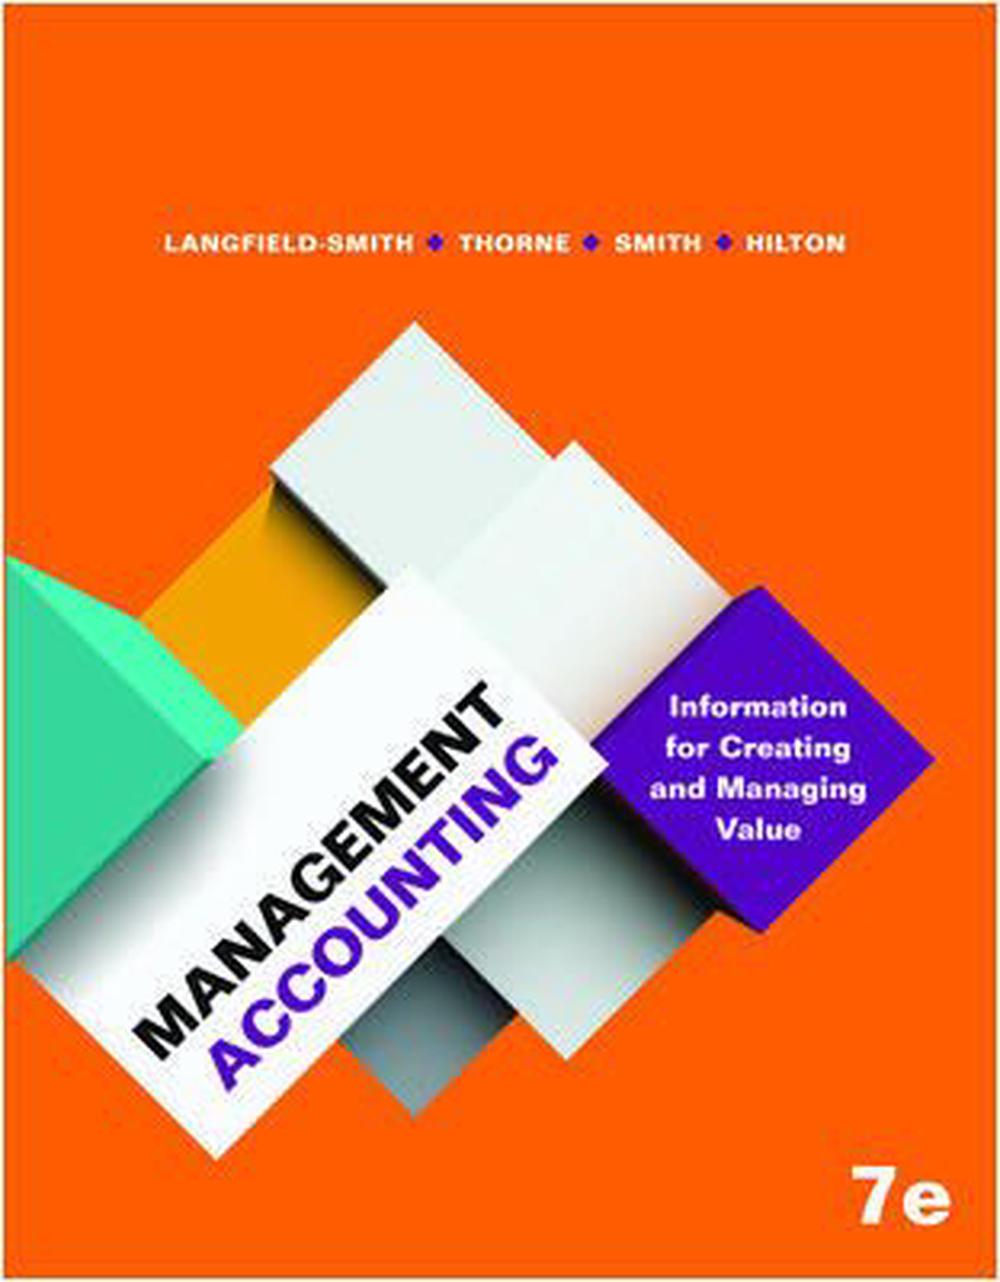 management-accounting-information-for-creating-and-managing-value-7th-edition-by-kim-langfield